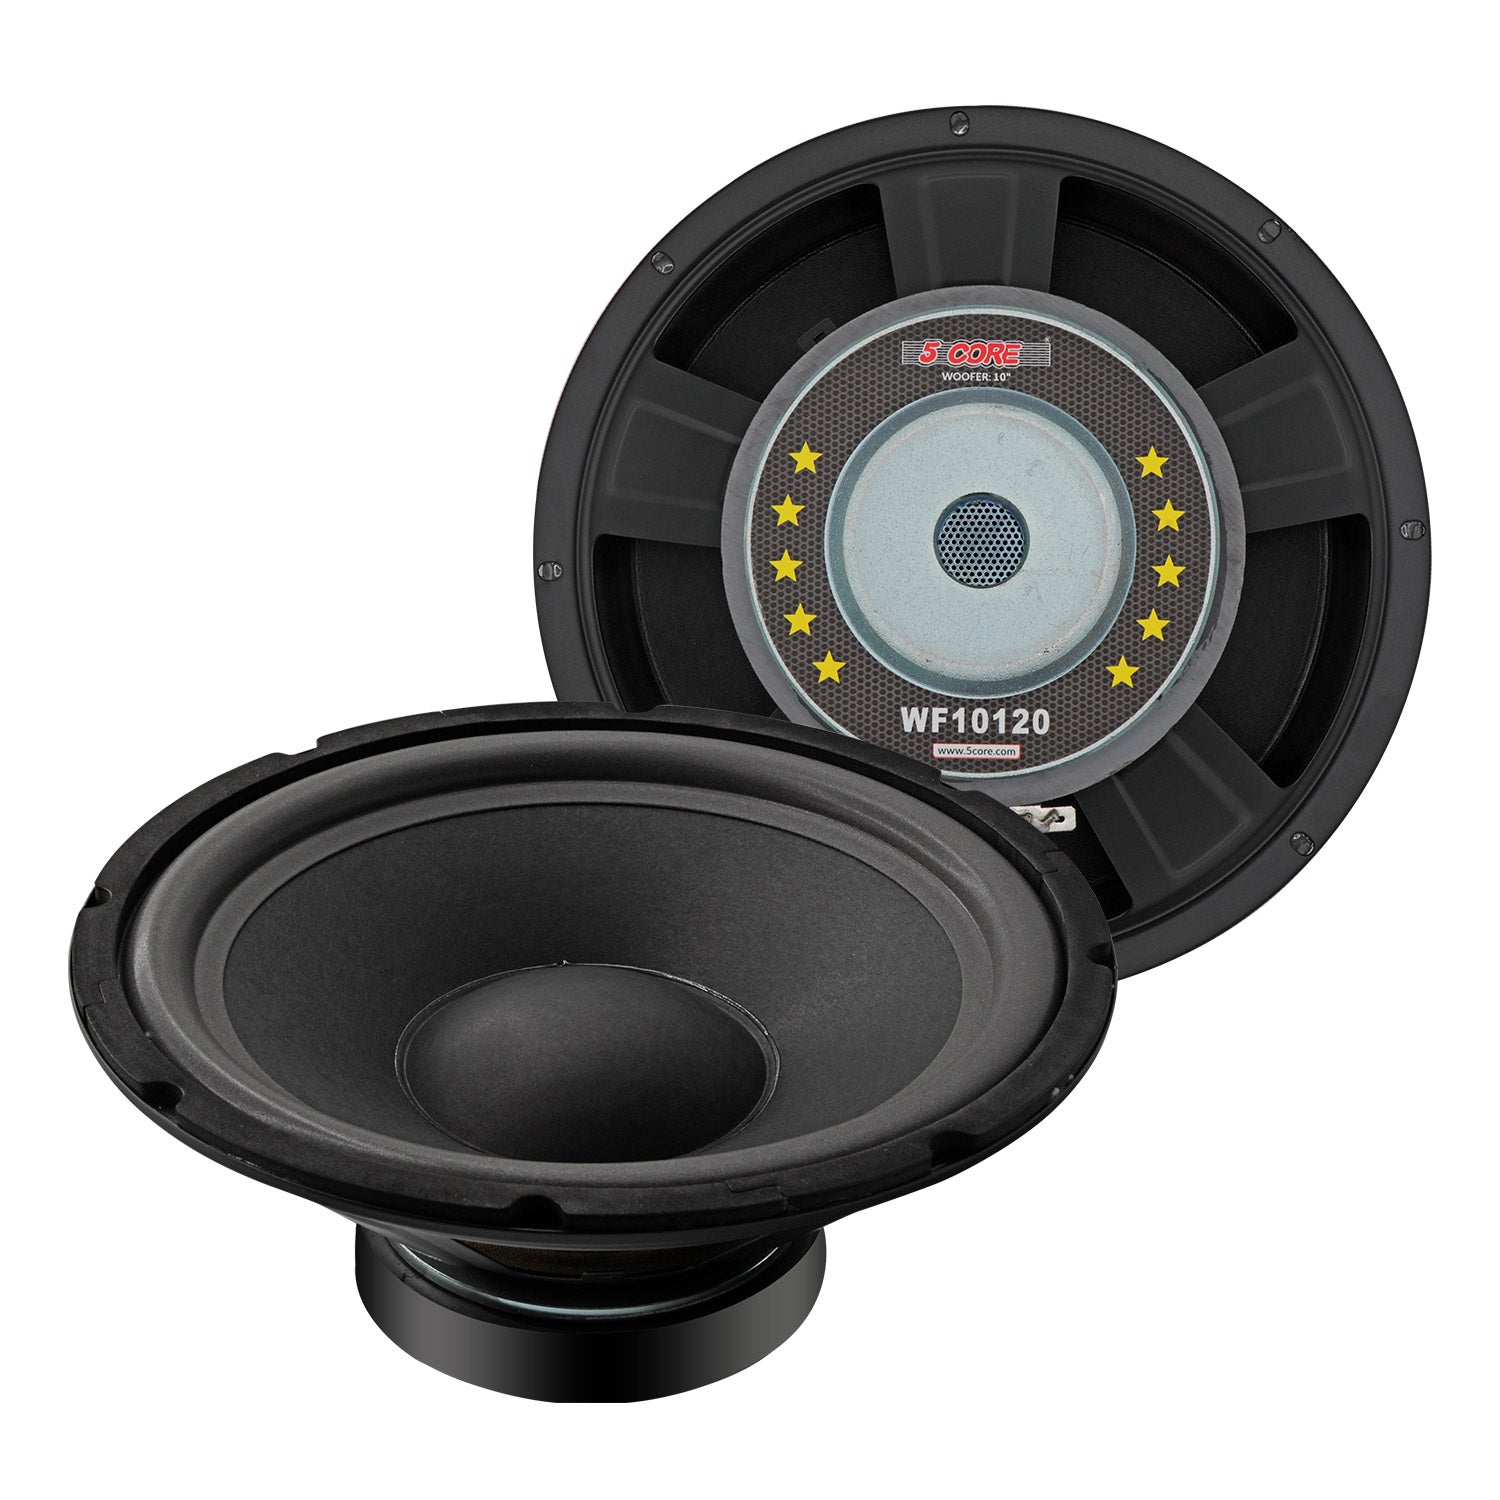 5 Core 10 Inch Subwoofer Speaker 750W Peak 8 Ohm Replacement Audio Bass Sub Woofer w 23 Oz Magnet